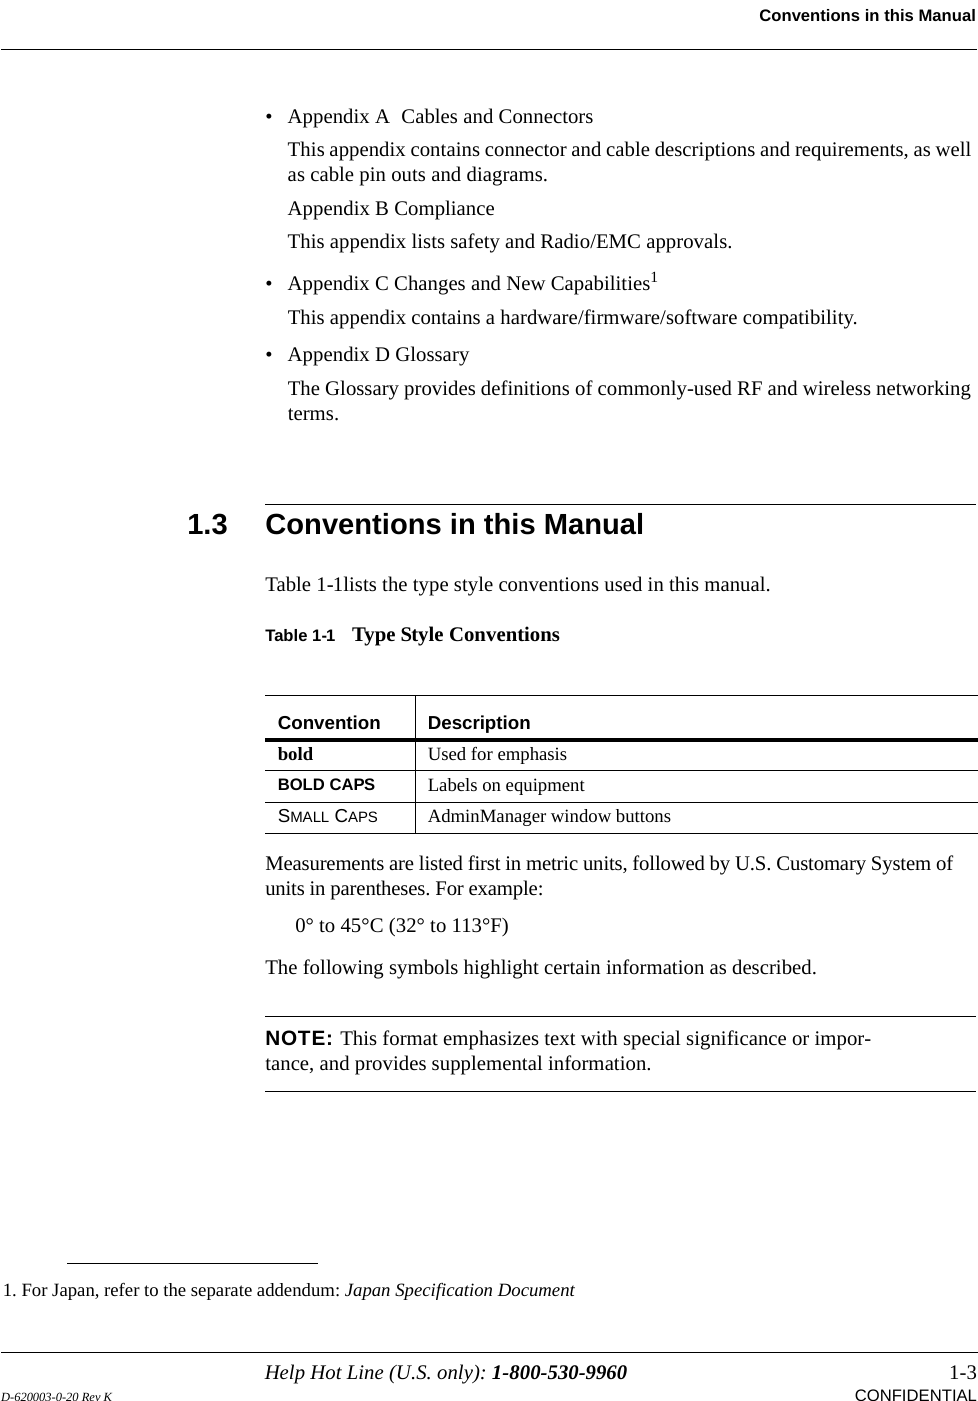 Help Hot Line (U.S. only): 1-800-530-9960 1-3D-620003-0-20 Rev K CONFIDENTIALConventions in this Manual• Appendix A  Cables and ConnectorsThis appendix contains connector and cable descriptions and requirements, as well as cable pin outs and diagrams.Appendix B ComplianceThis appendix lists safety and Radio/EMC approvals.• Appendix C Changes and New Capabilities1This appendix contains a hardware/firmware/software compatibility.• Appendix D GlossaryThe Glossary provides definitions of commonly-used RF and wireless networking terms.1.3 Conventions in this ManualTable 1-1lists the type style conventions used in this manual.Table 1-1 Type Style ConventionsMeasurements are listed first in metric units, followed by U.S. Customary System of units in parentheses. For example:0° to 45°C (32° to 113°F)The following symbols highlight certain information as described.NOTE: This format emphasizes text with special significance or impor-tance, and provides supplemental information.1. For Japan, refer to the separate addendum: Japan Specification DocumentConvention Descriptionbold Used for emphasisBOLD CAPS Labels on equipmentSMALL CAPS AdminManager window buttons